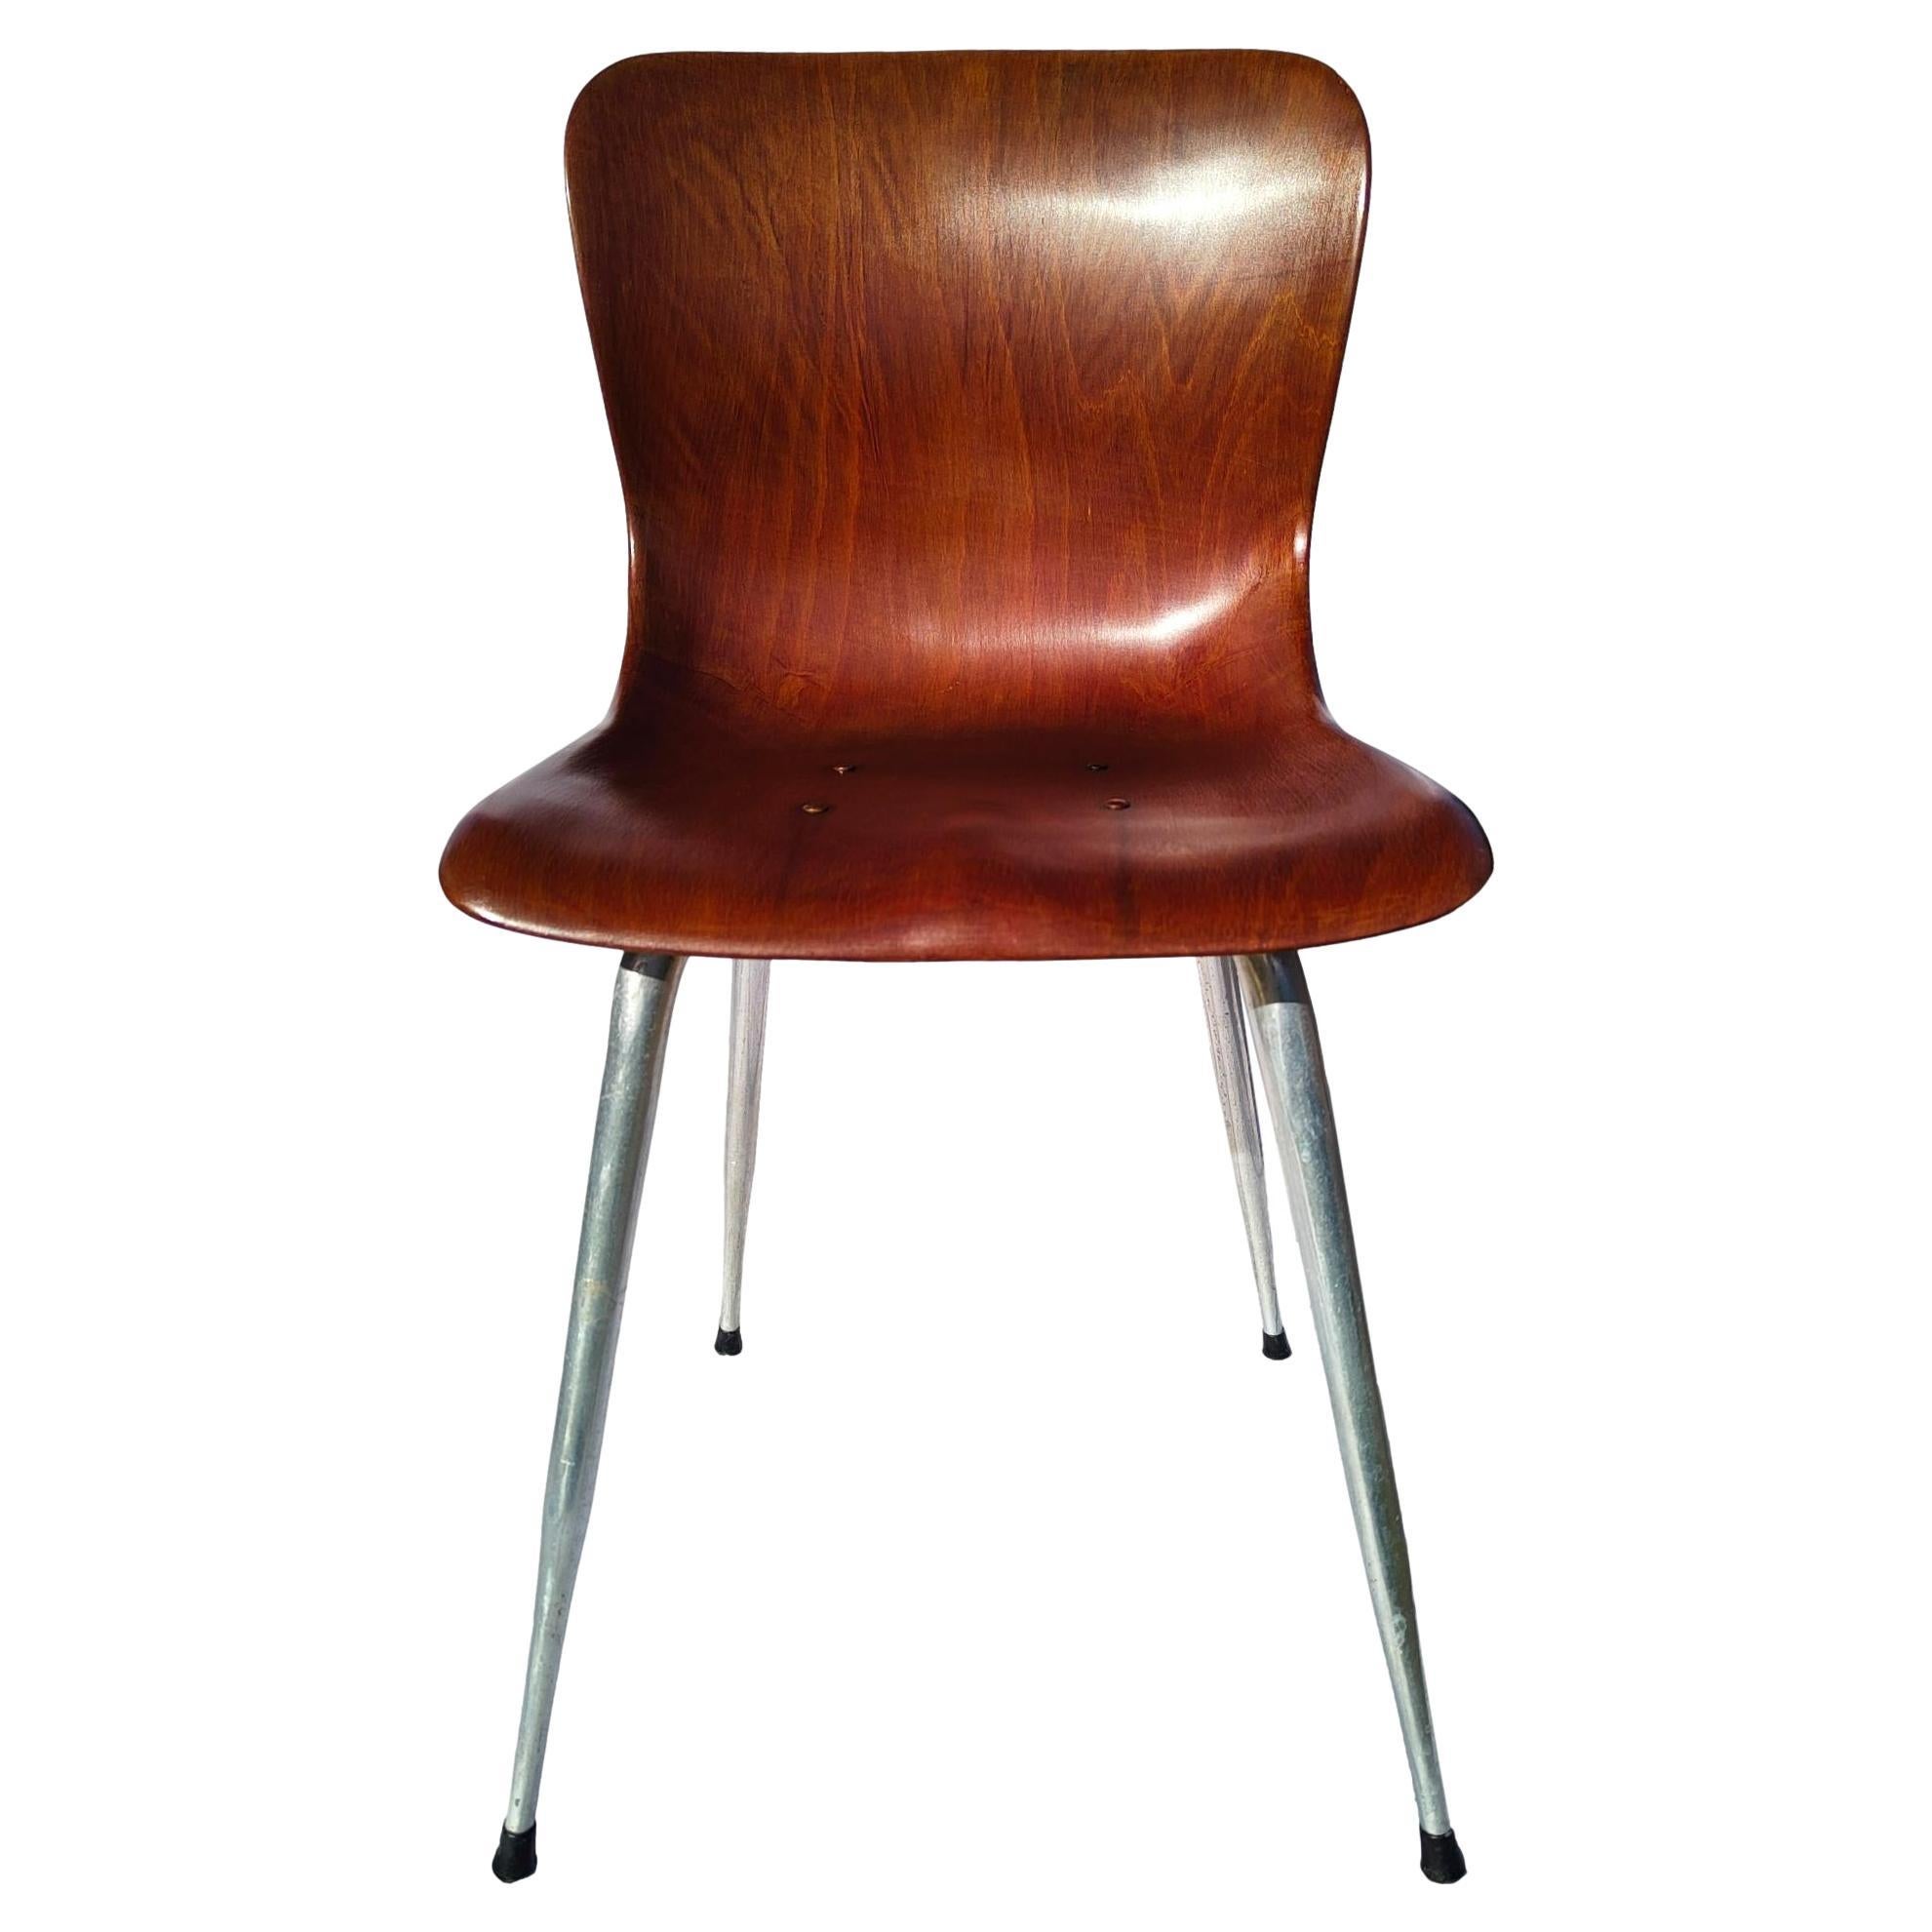 Chair 15074/II Design Elmar Flototto for Pagholz, 1960 For Sale